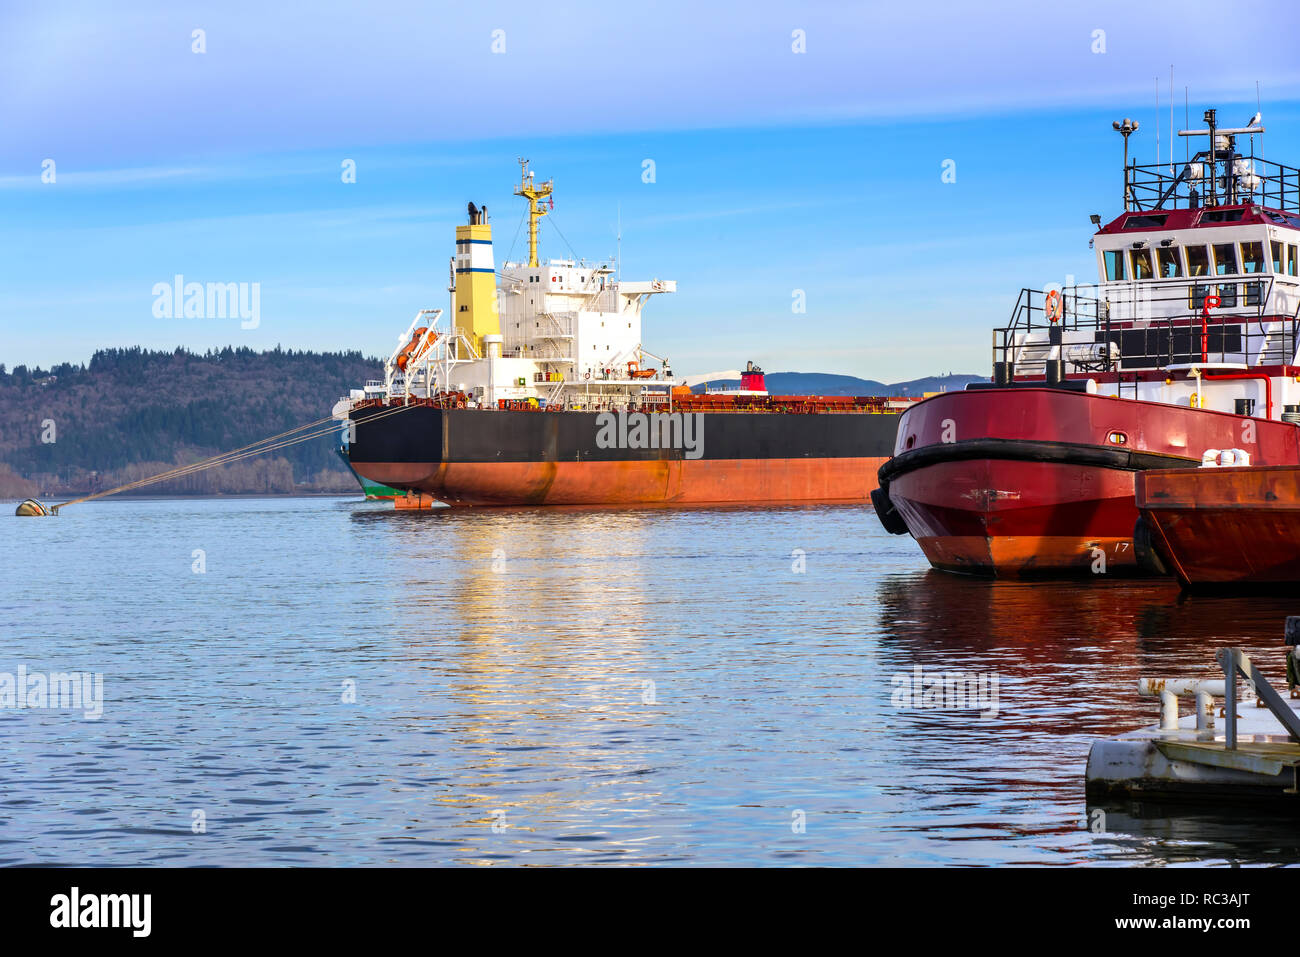 Large tanker and tugboat moored in Rainier Oregon state. Stock Photo